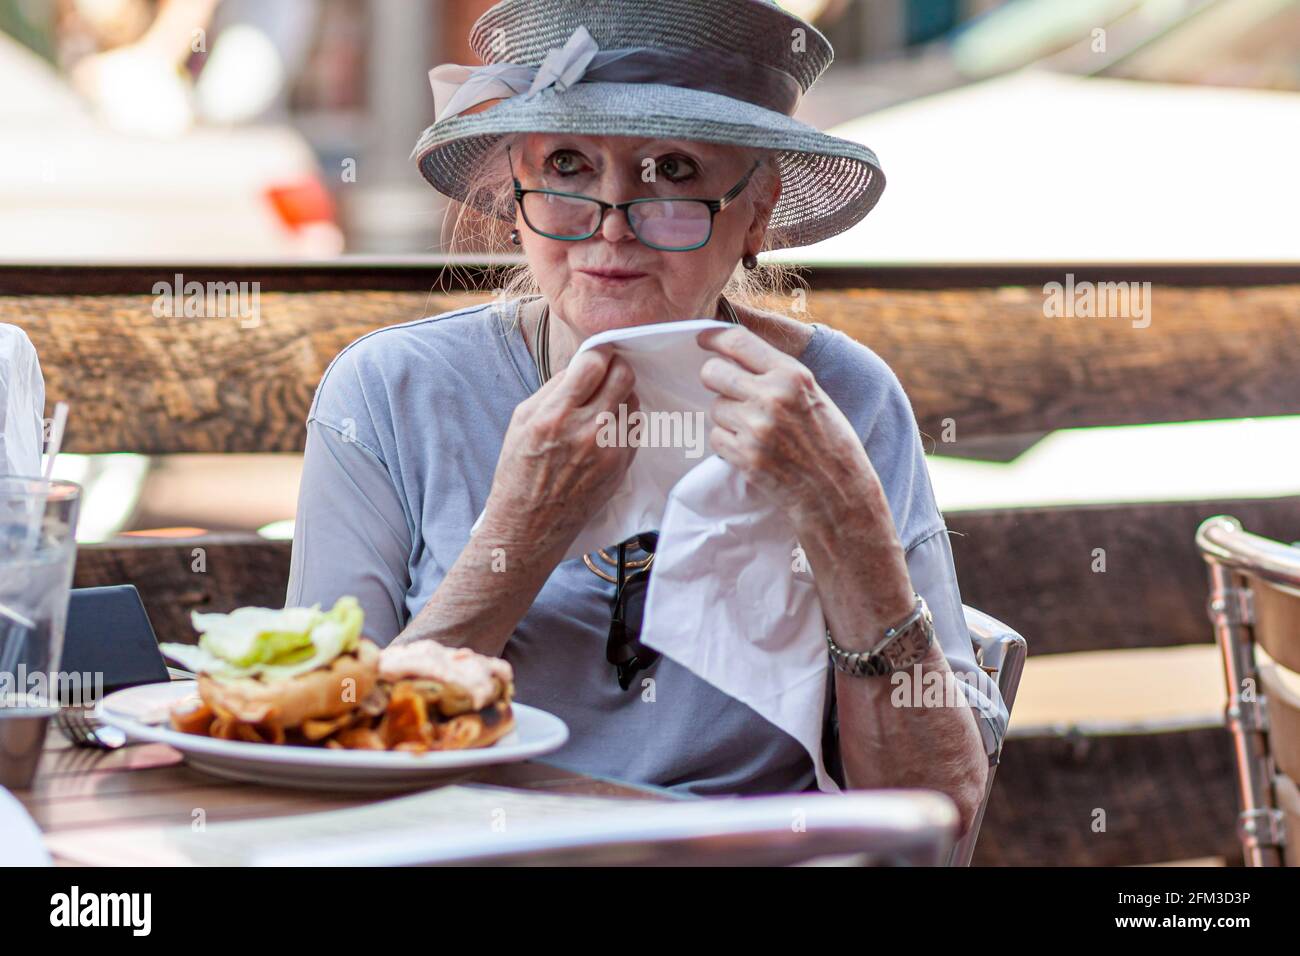 05-02-2021 Annapolis, MD, USA: An old caucasian lady wearing a wide brim wedding hat is having a lunch alone at a restaurant. She is wiping her mouth Stock Photo